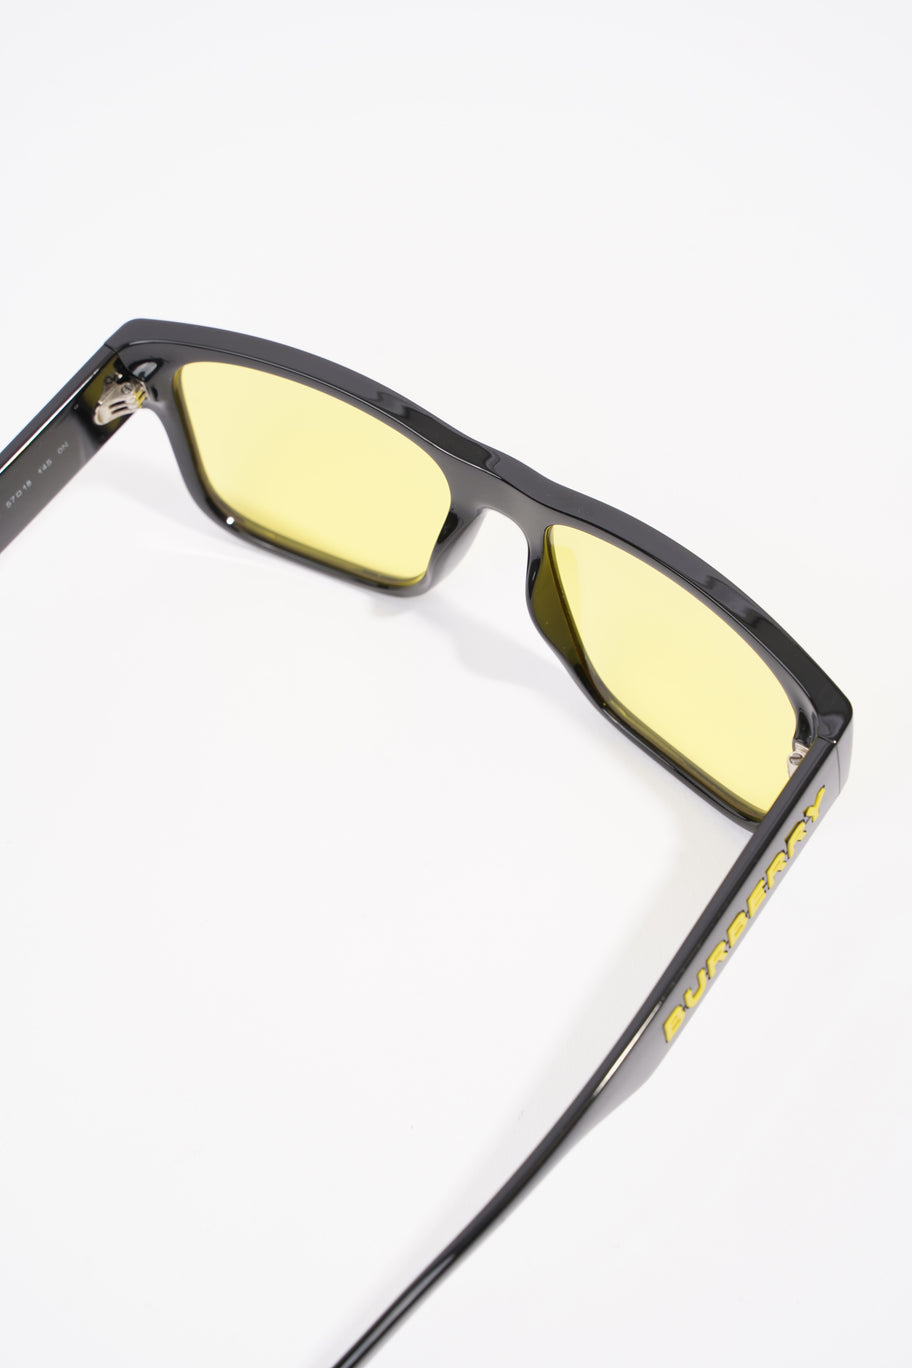 Knight Square Tinted Sunglasses Black / Yellow Acetate 145mm Image 6